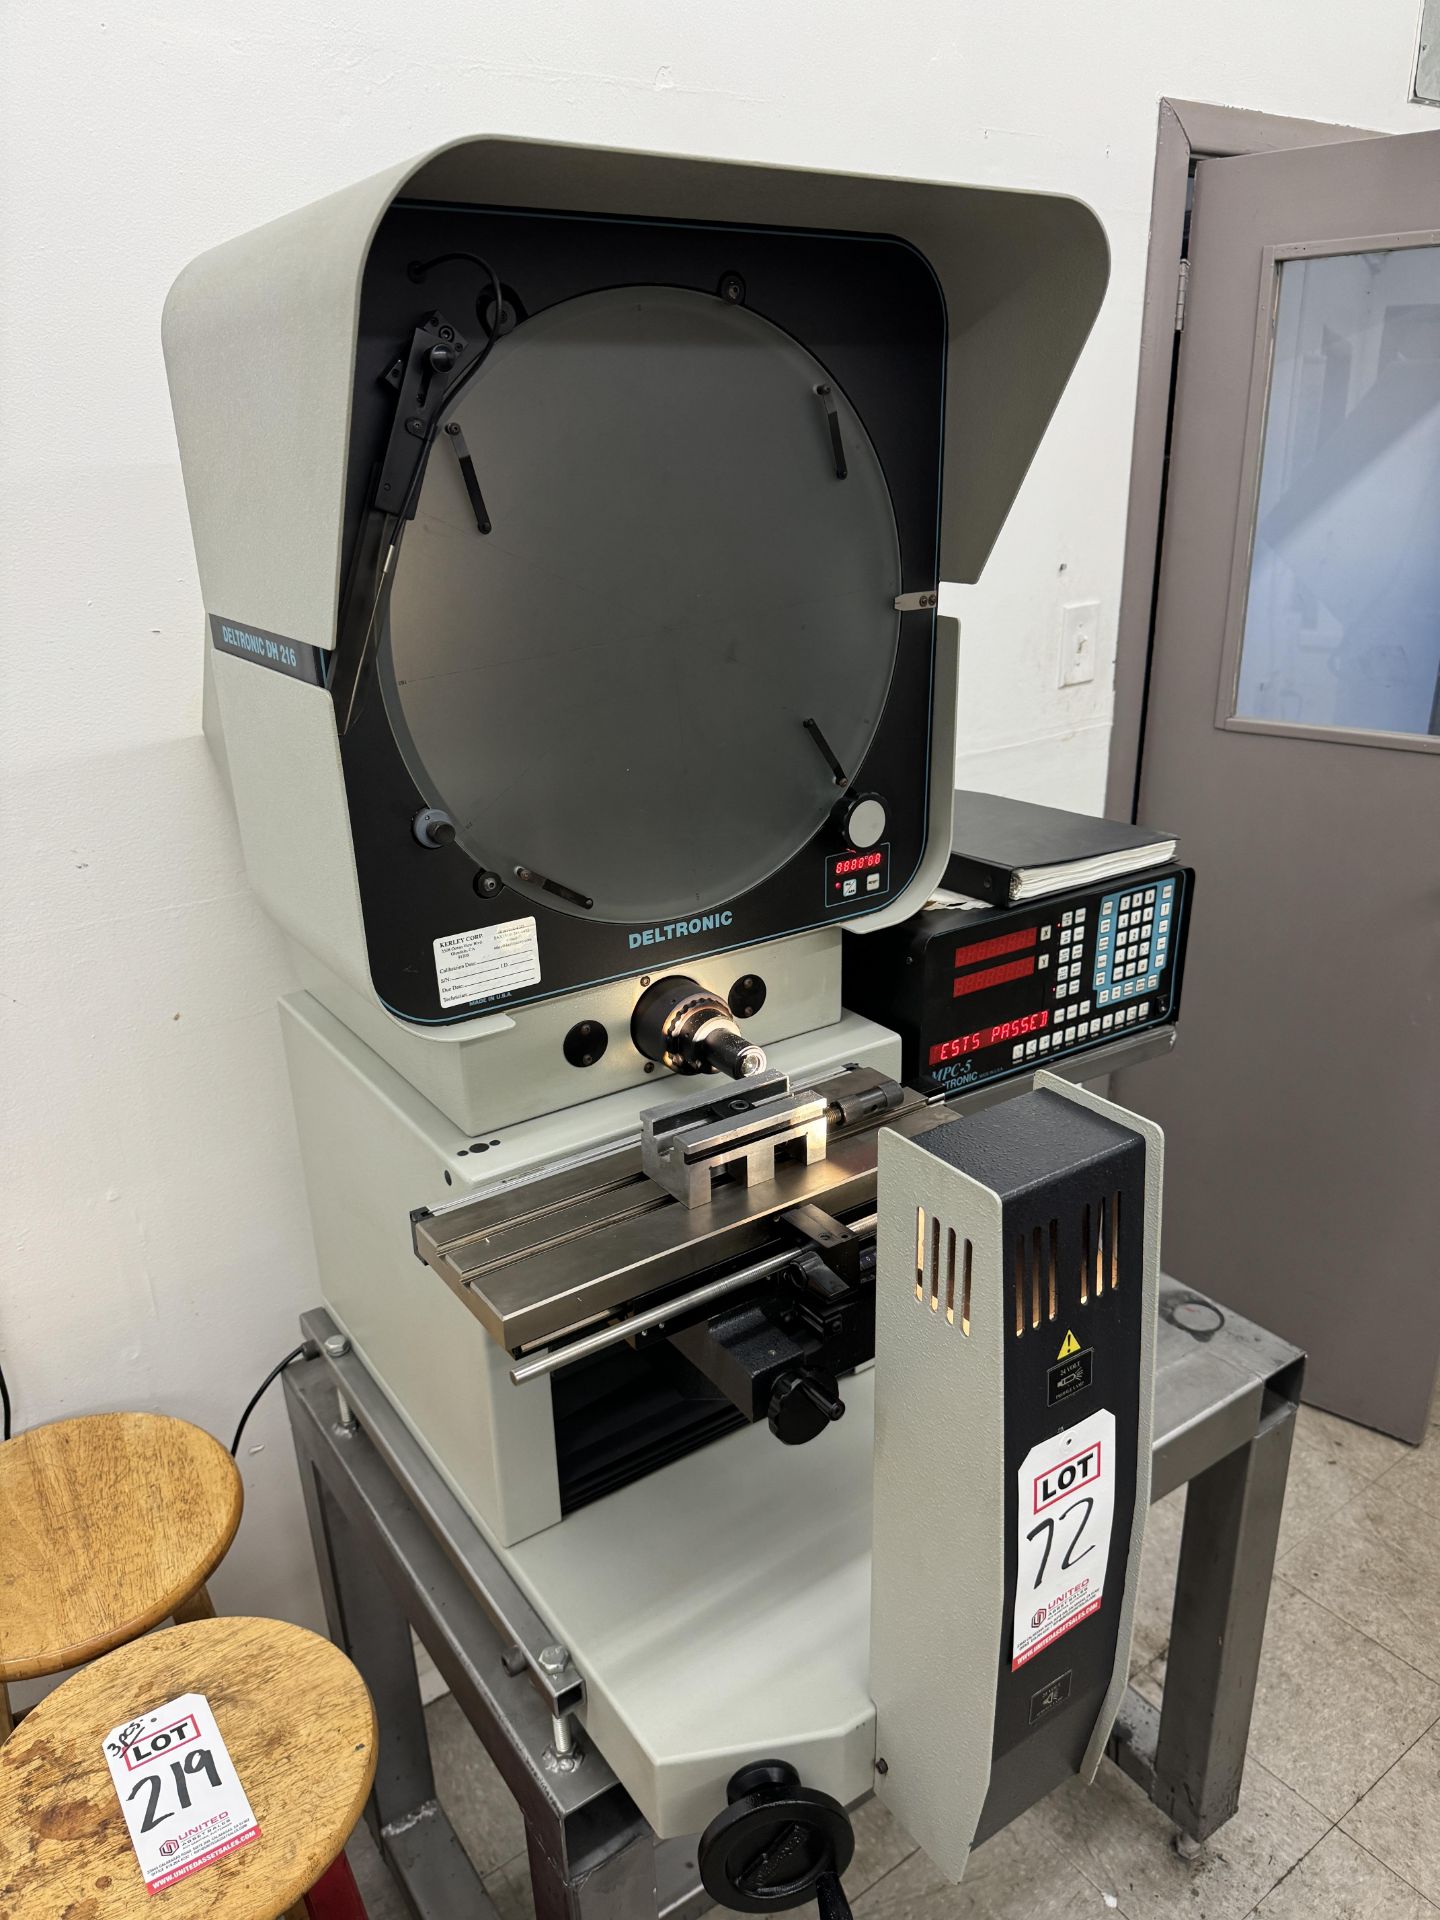 DELTRONIC DH 216-MPC-5-E OPTICAL COMPARATOR, MPC-5 XY DRO, S/N 306117840 - Image 10 of 13